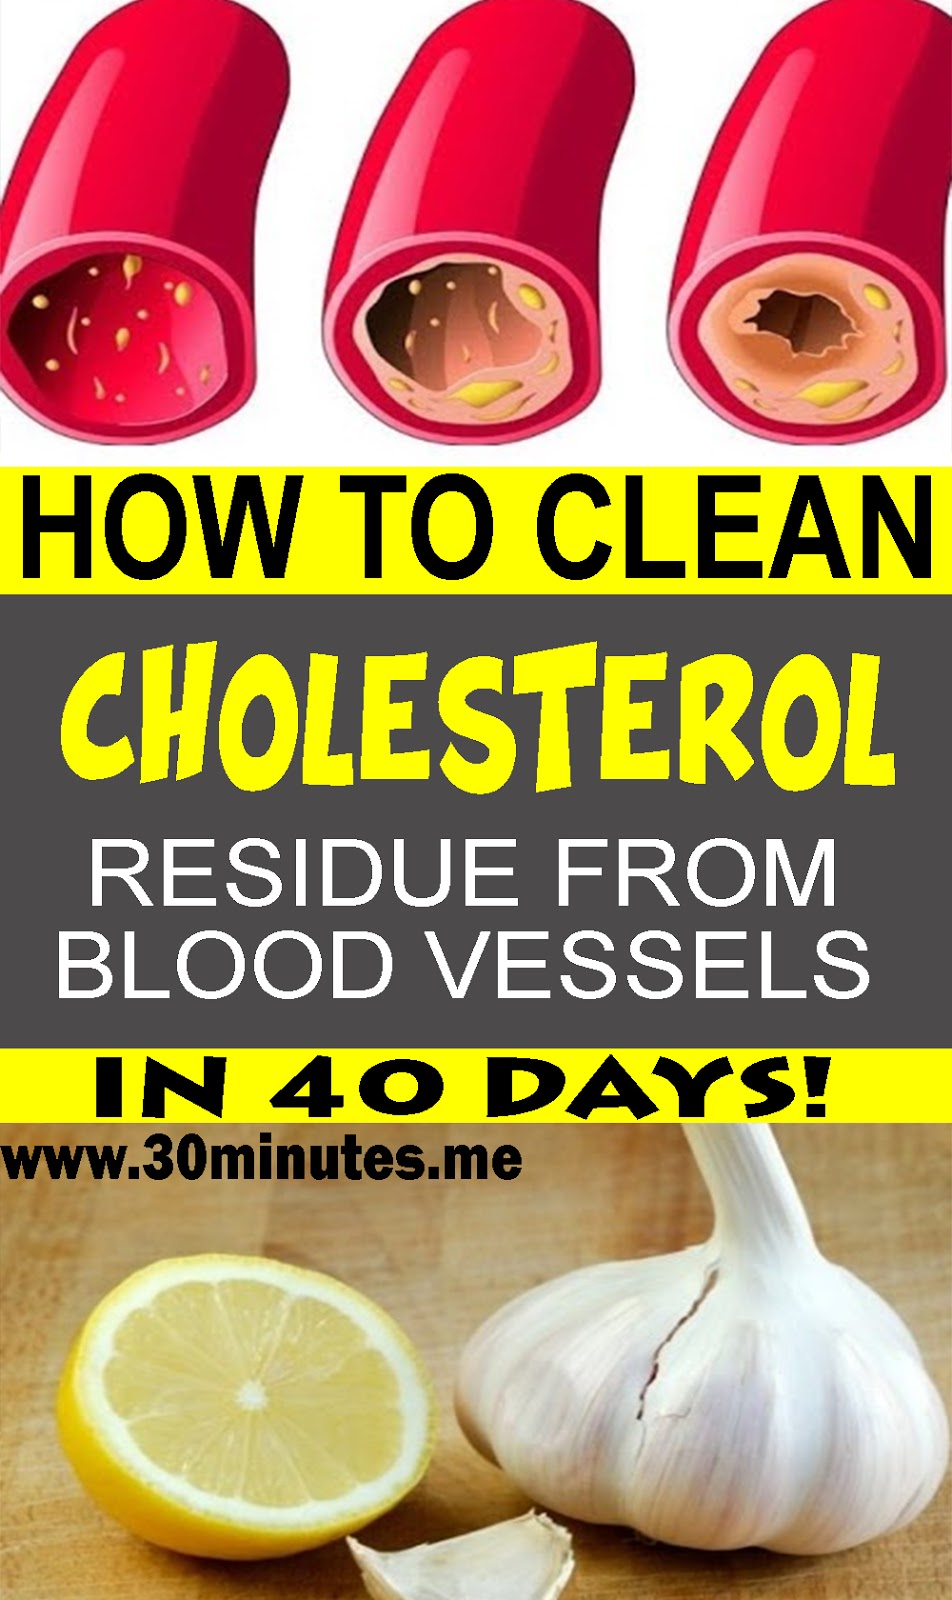 how-to-clean-cholesterol-residue-from-blood-vessels-in-40-days-health